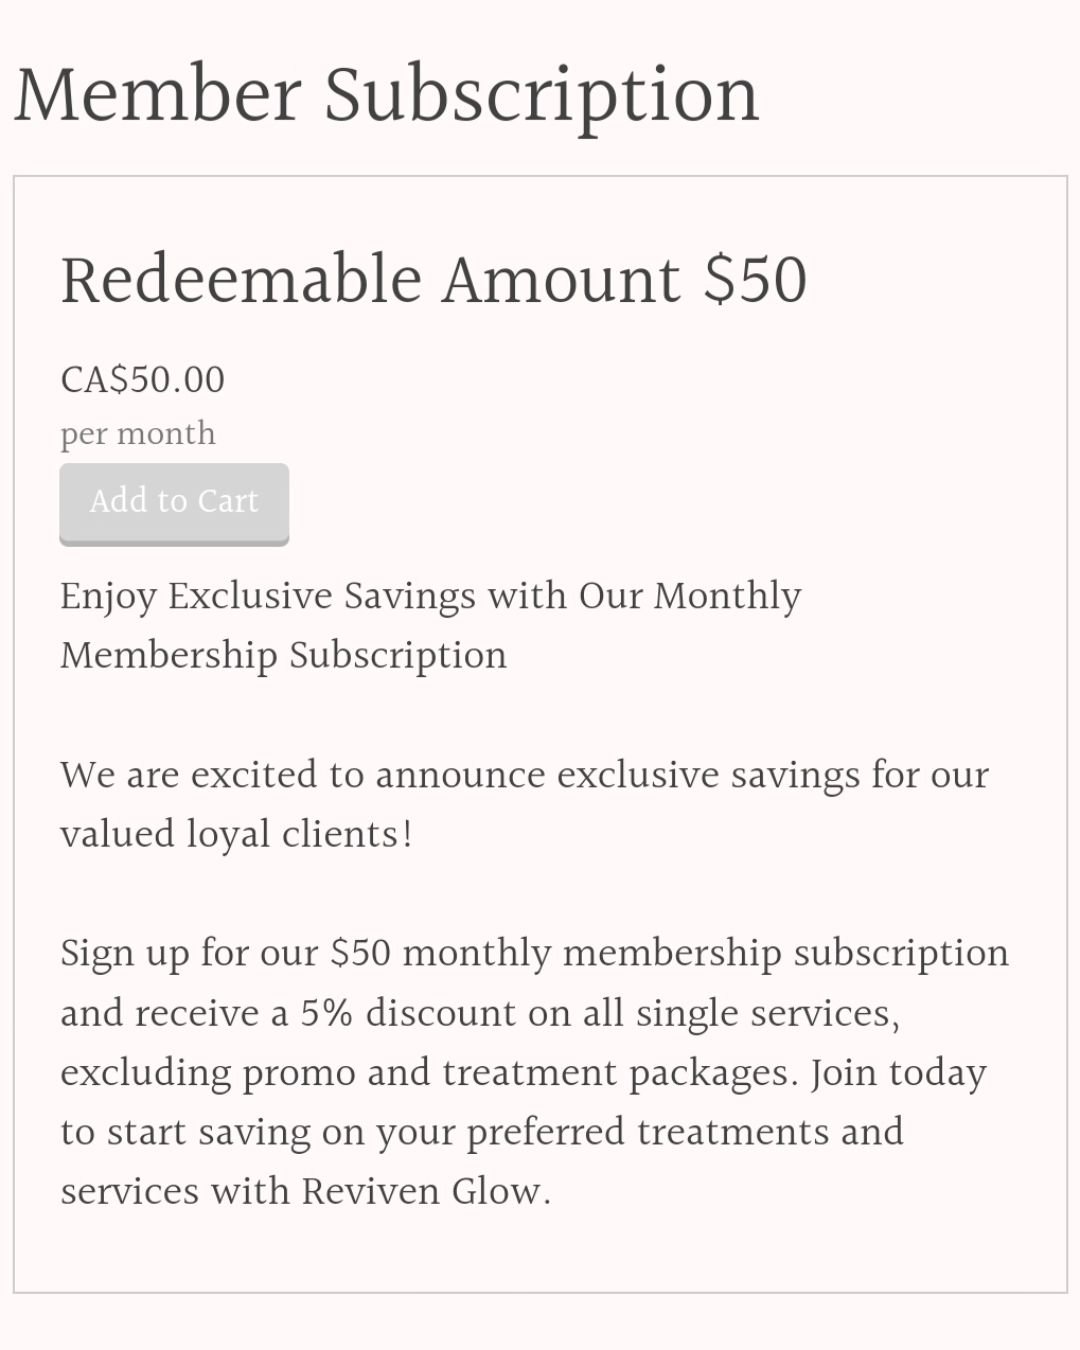 A big announcement for our valued clients:

No more **offer** discounts on services. ❌

We are excited to announce exclusive savings for our valued, loyal clients. 🎉
Sign up for our monthly membership and receive a discount on all single services an